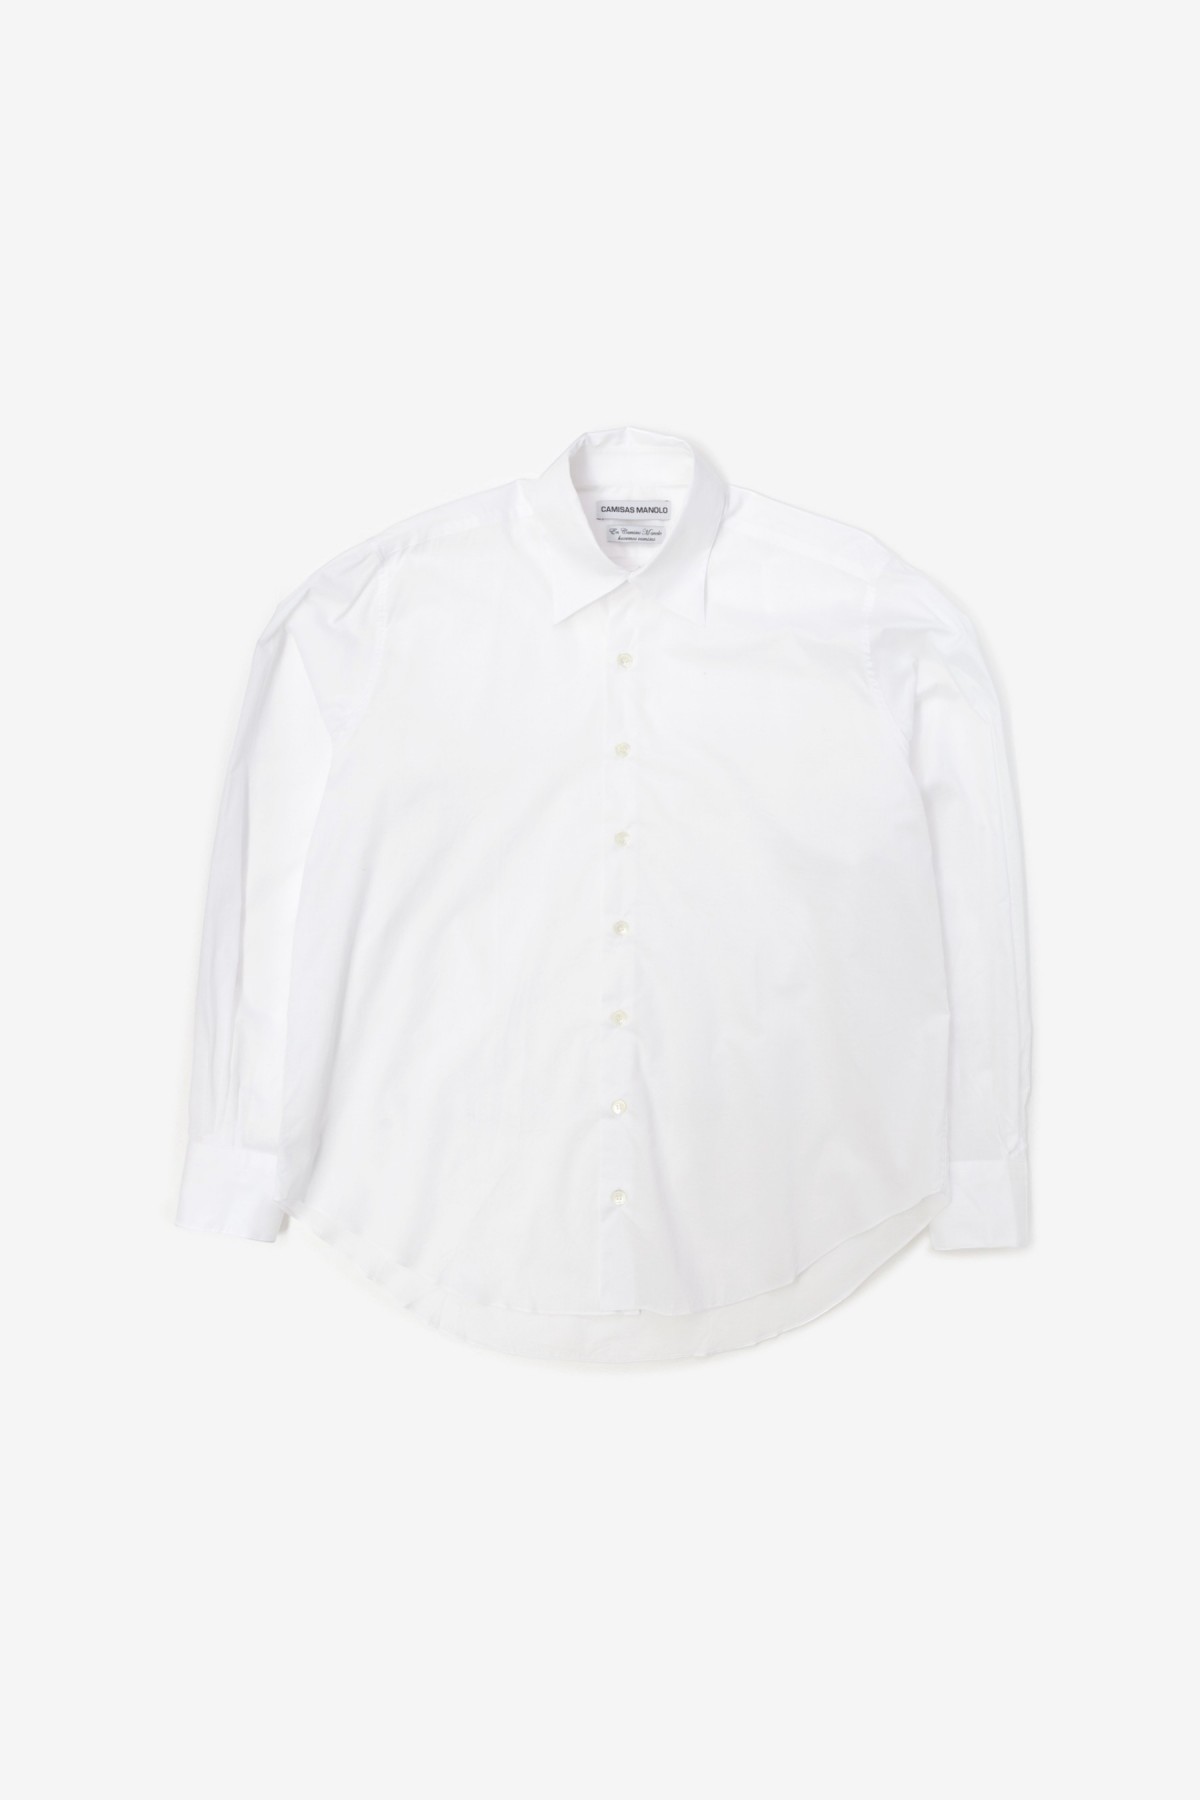 Camisas Manolo Normal Shirt in White Voile